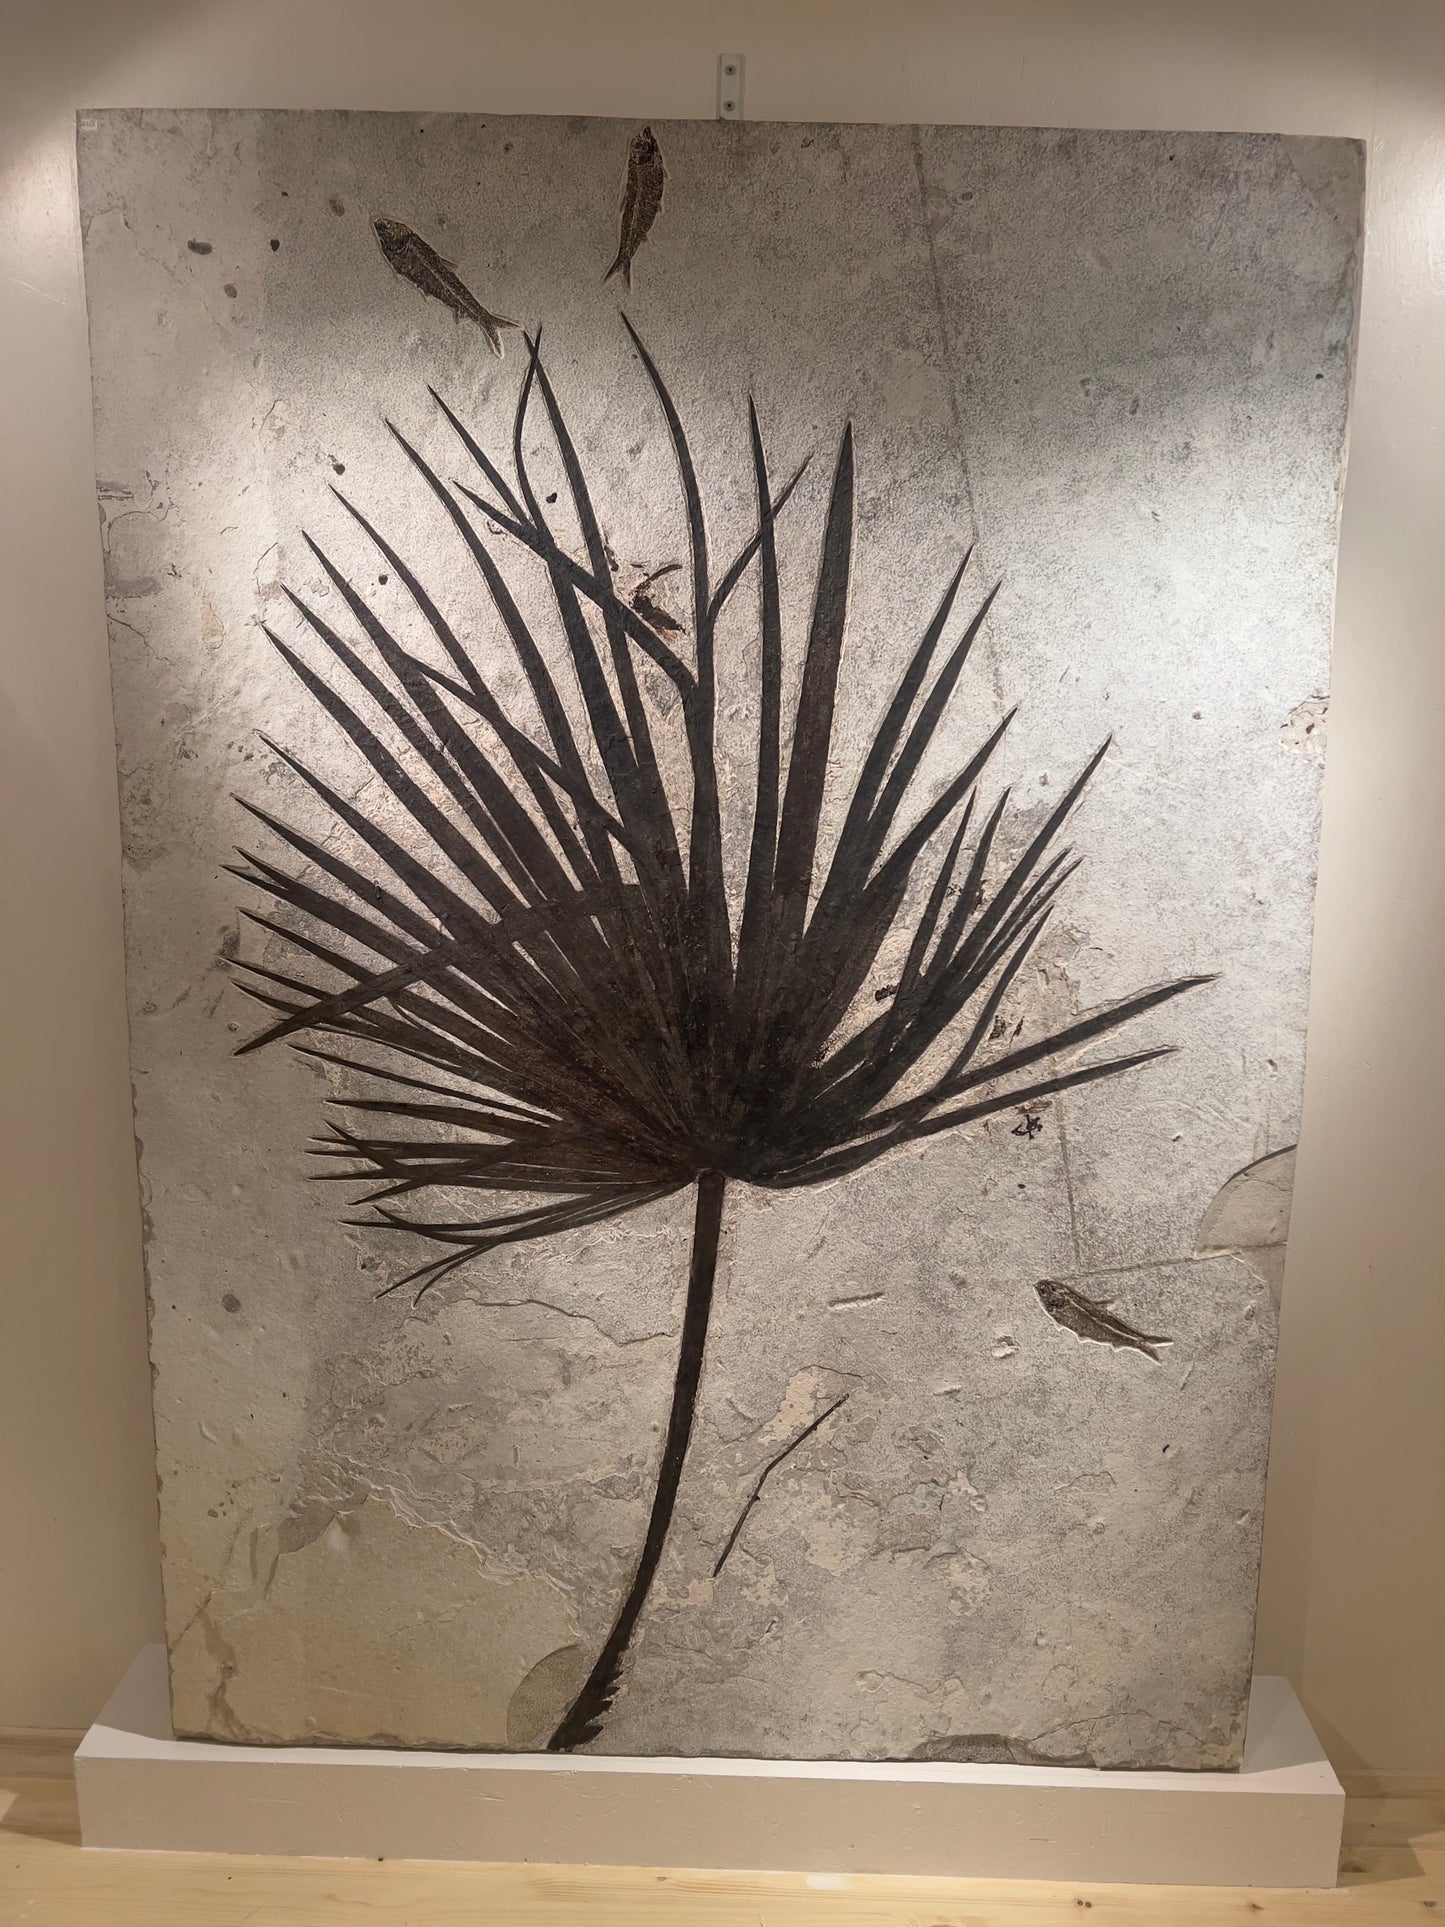 Fossilized palm leaf surrounded by fish fossils | Green River, Wyoming, USA